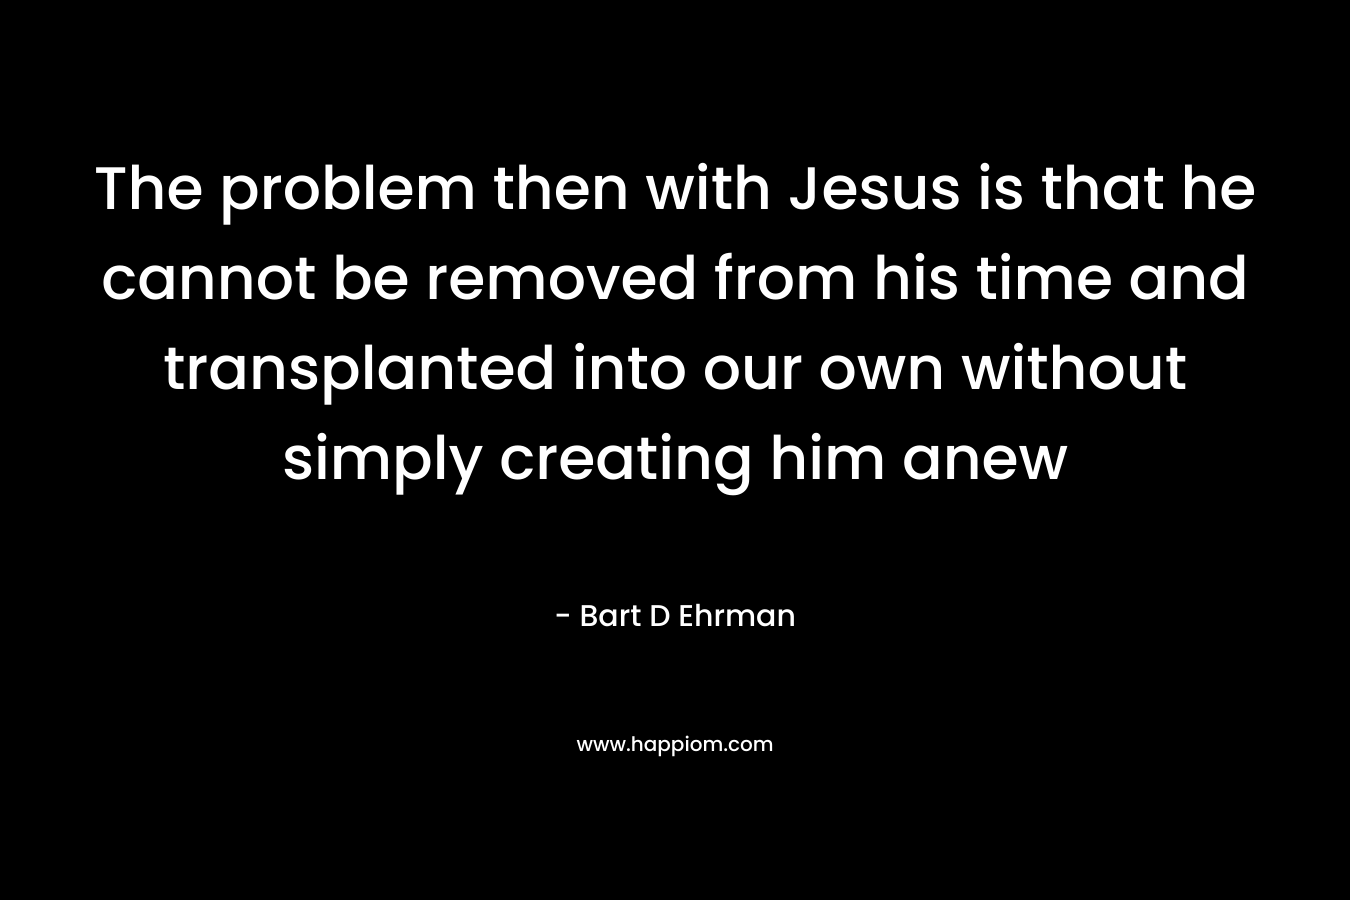 The problem then with Jesus is that he cannot be removed from his time and transplanted into our own without simply creating him anew – Bart D Ehrman